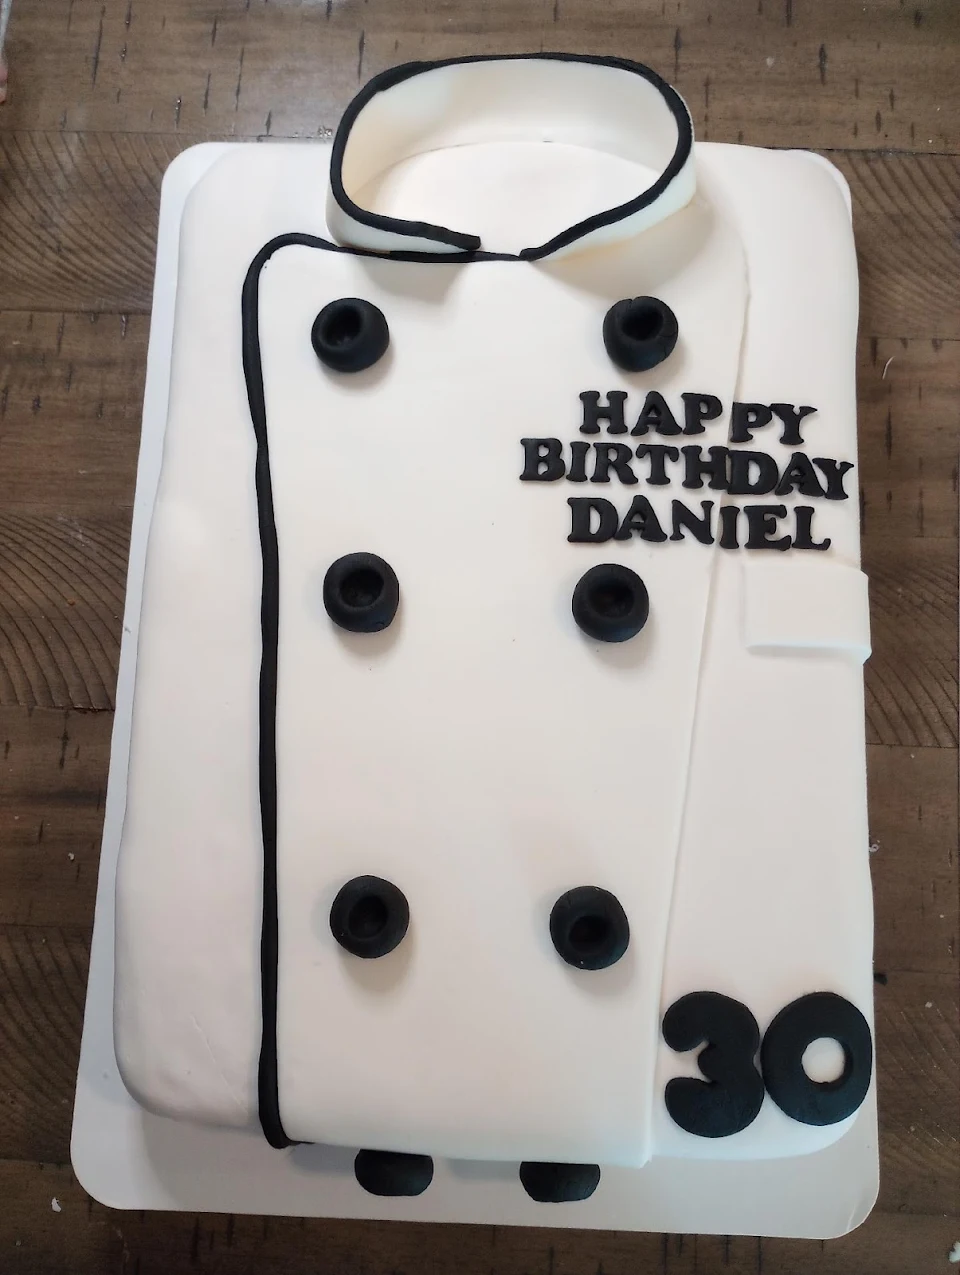 Chef Theme birthday cake. Simple but oddly satisfied with final product.